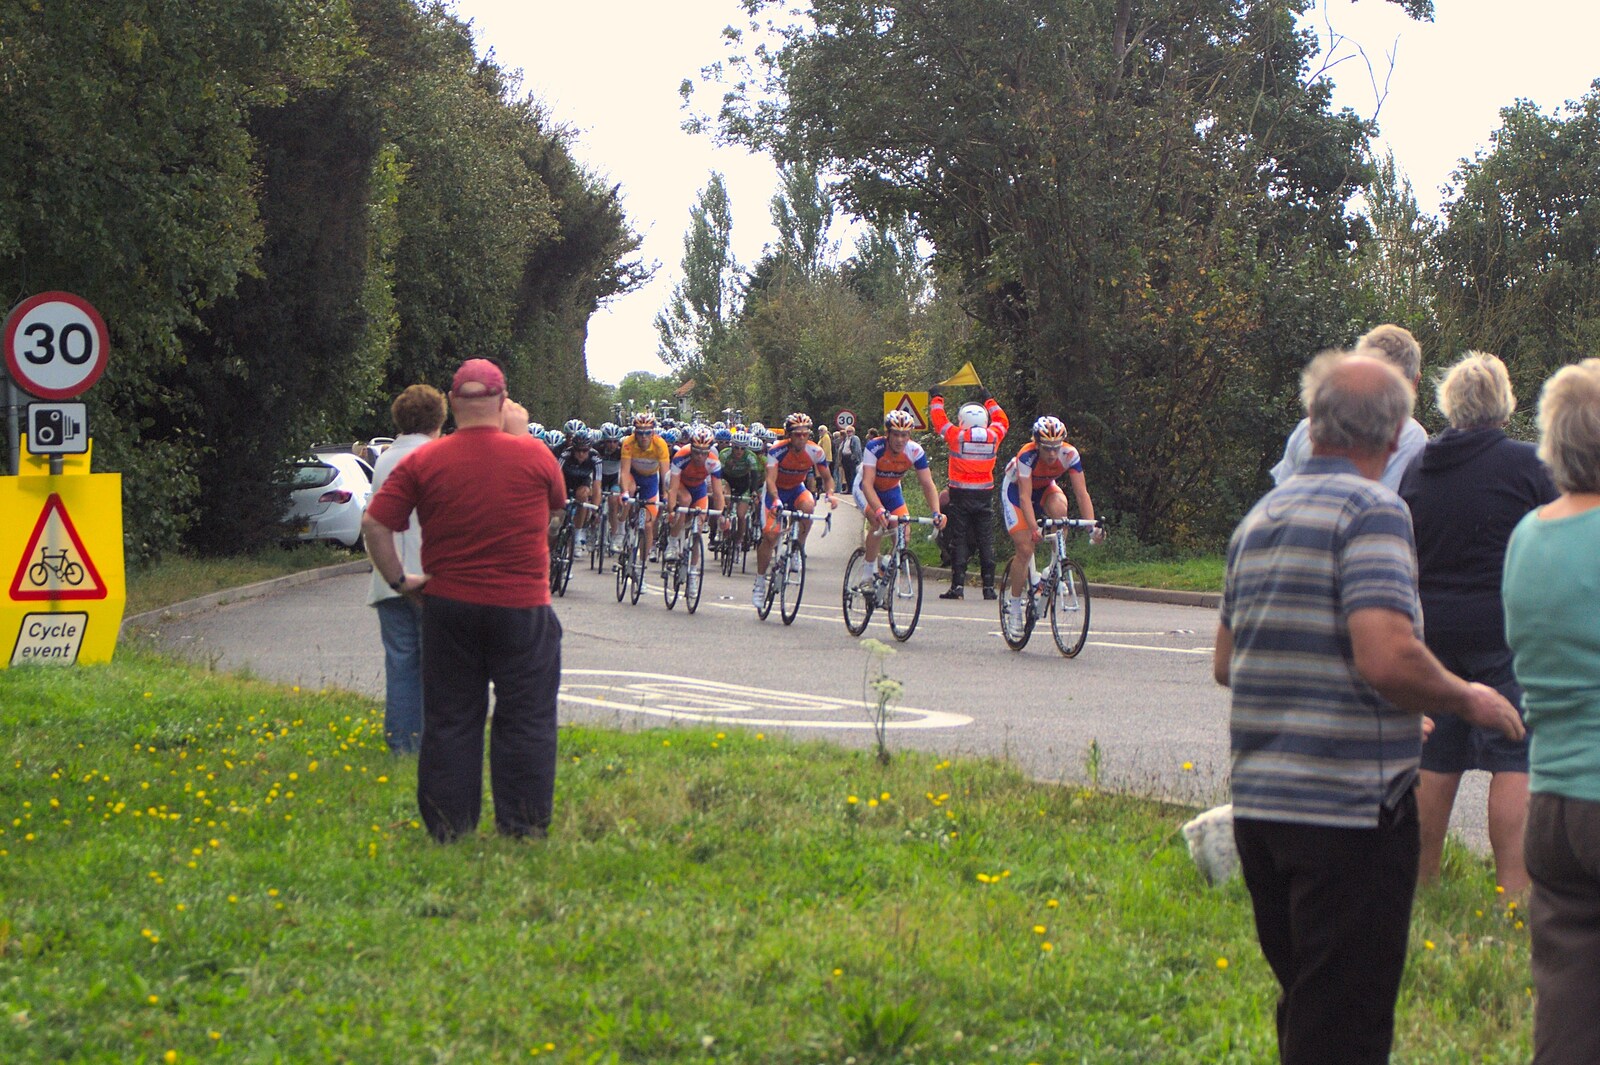 The main group of bikes appears from The Tour of Britain, Brome, Suffolk - 17th September 2011